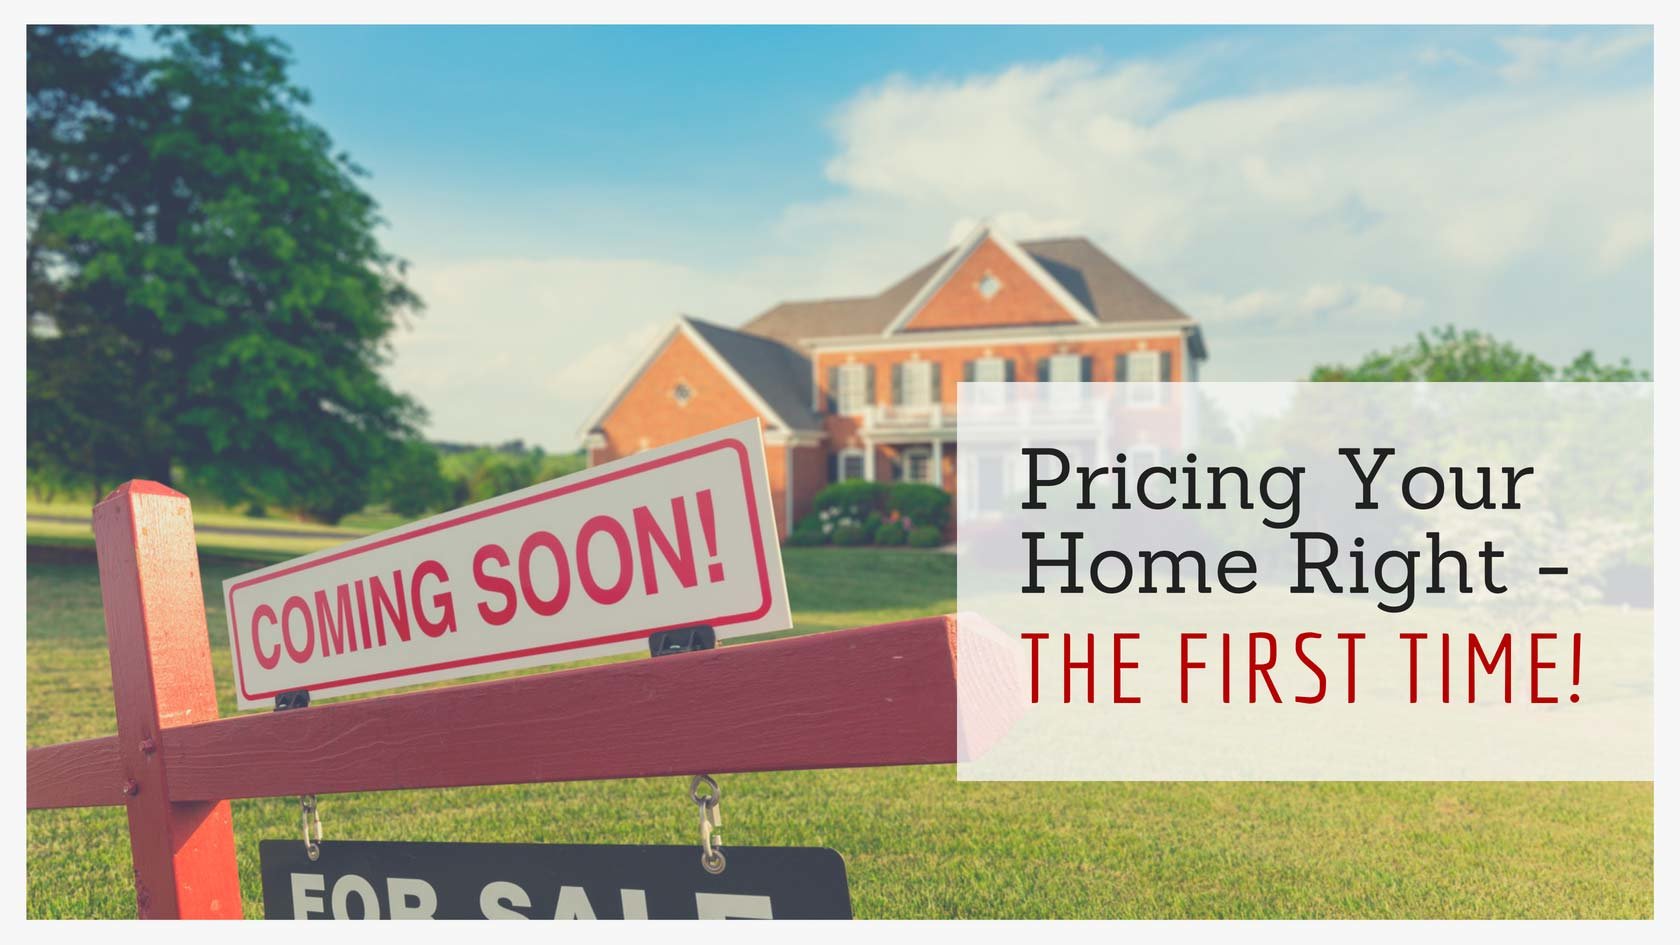 Pricing Your Home to Sell at the Right Price